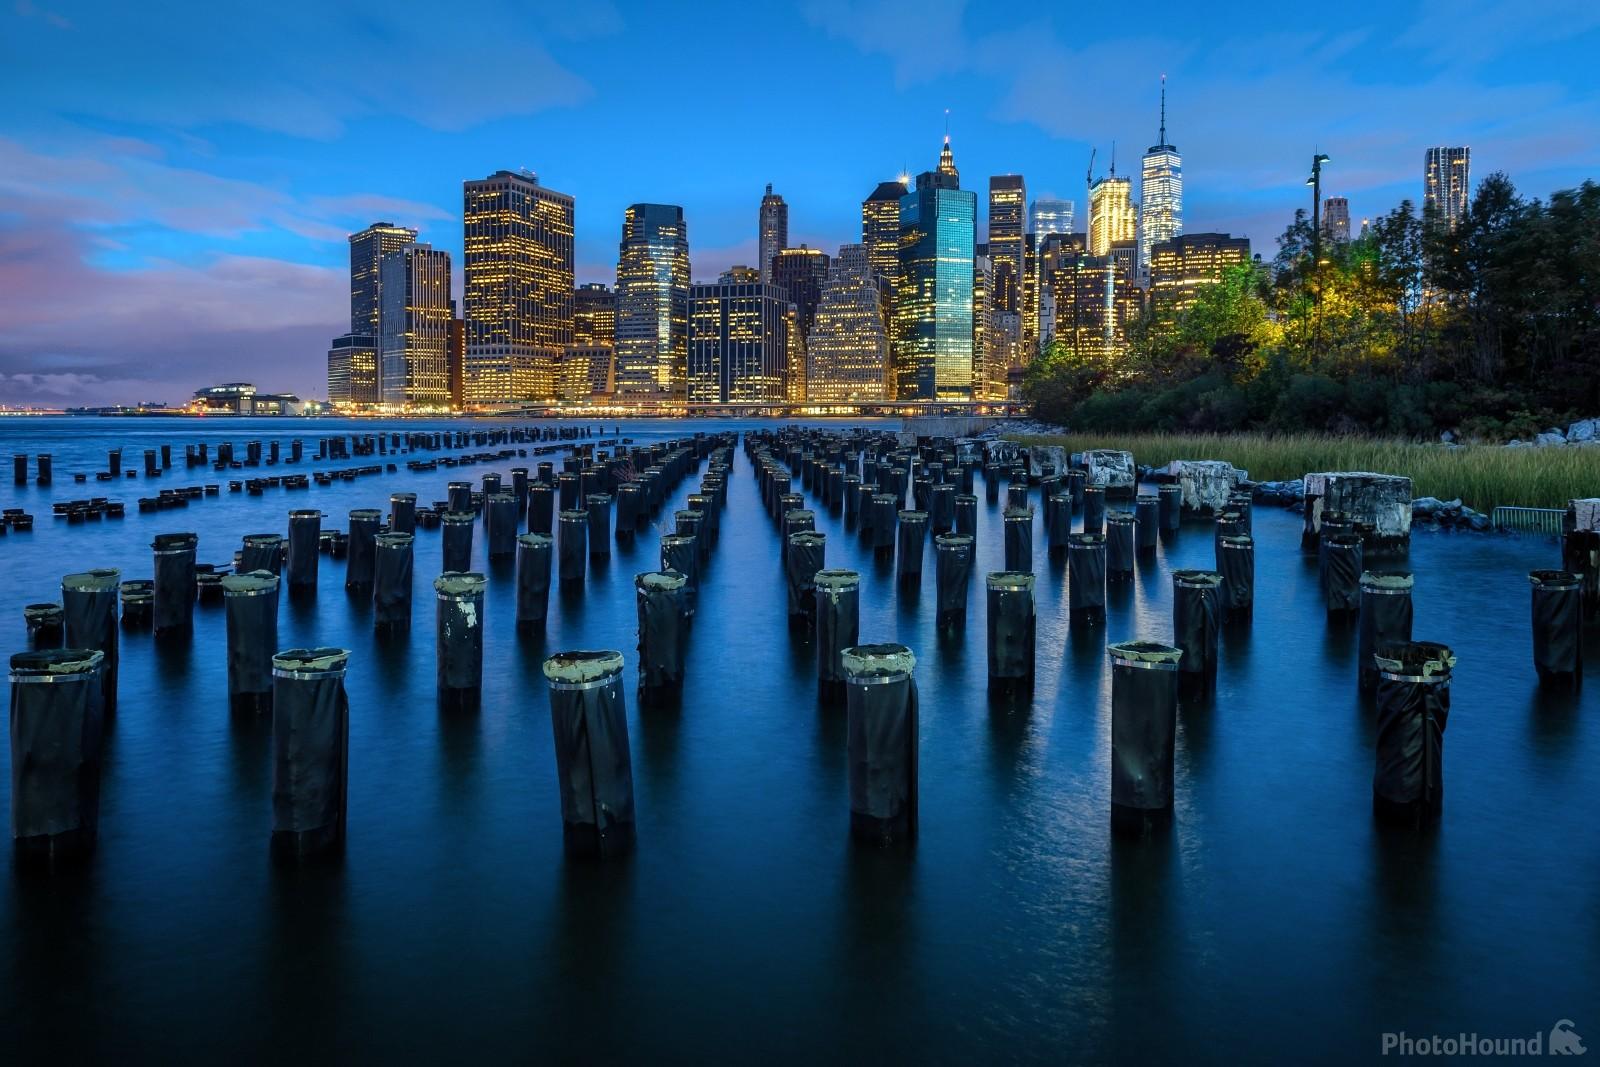 Image of Old wooden pillars in the East River - Old Pier 1 by VOJTa Herout